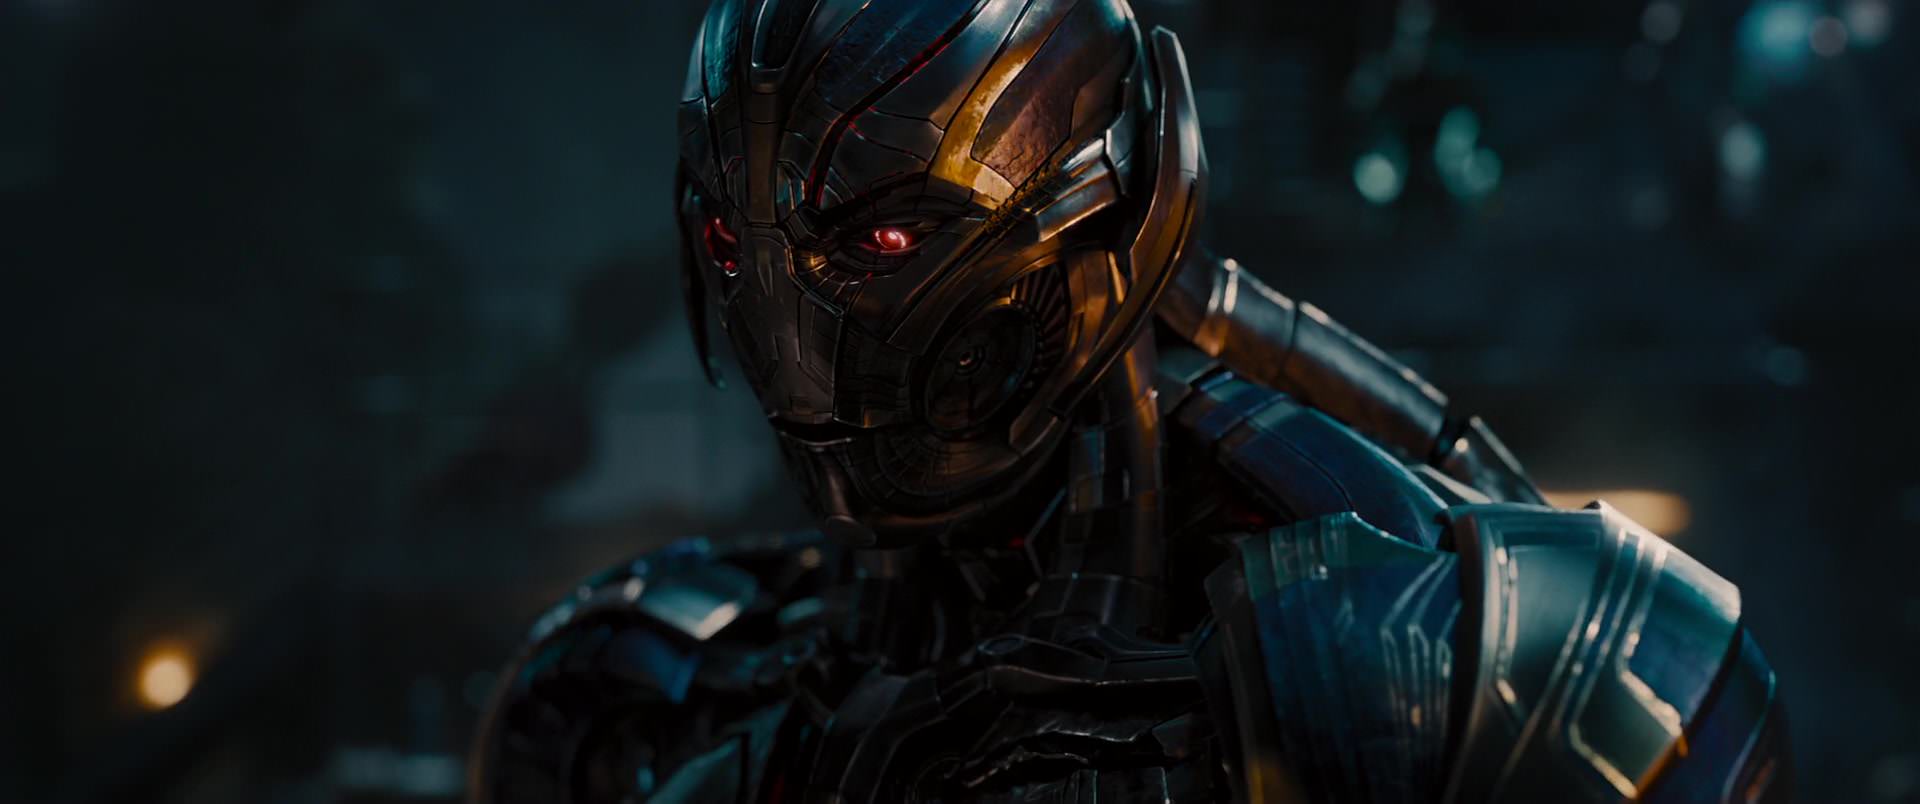 avengers age of ultron full movie download in hindi filmywap